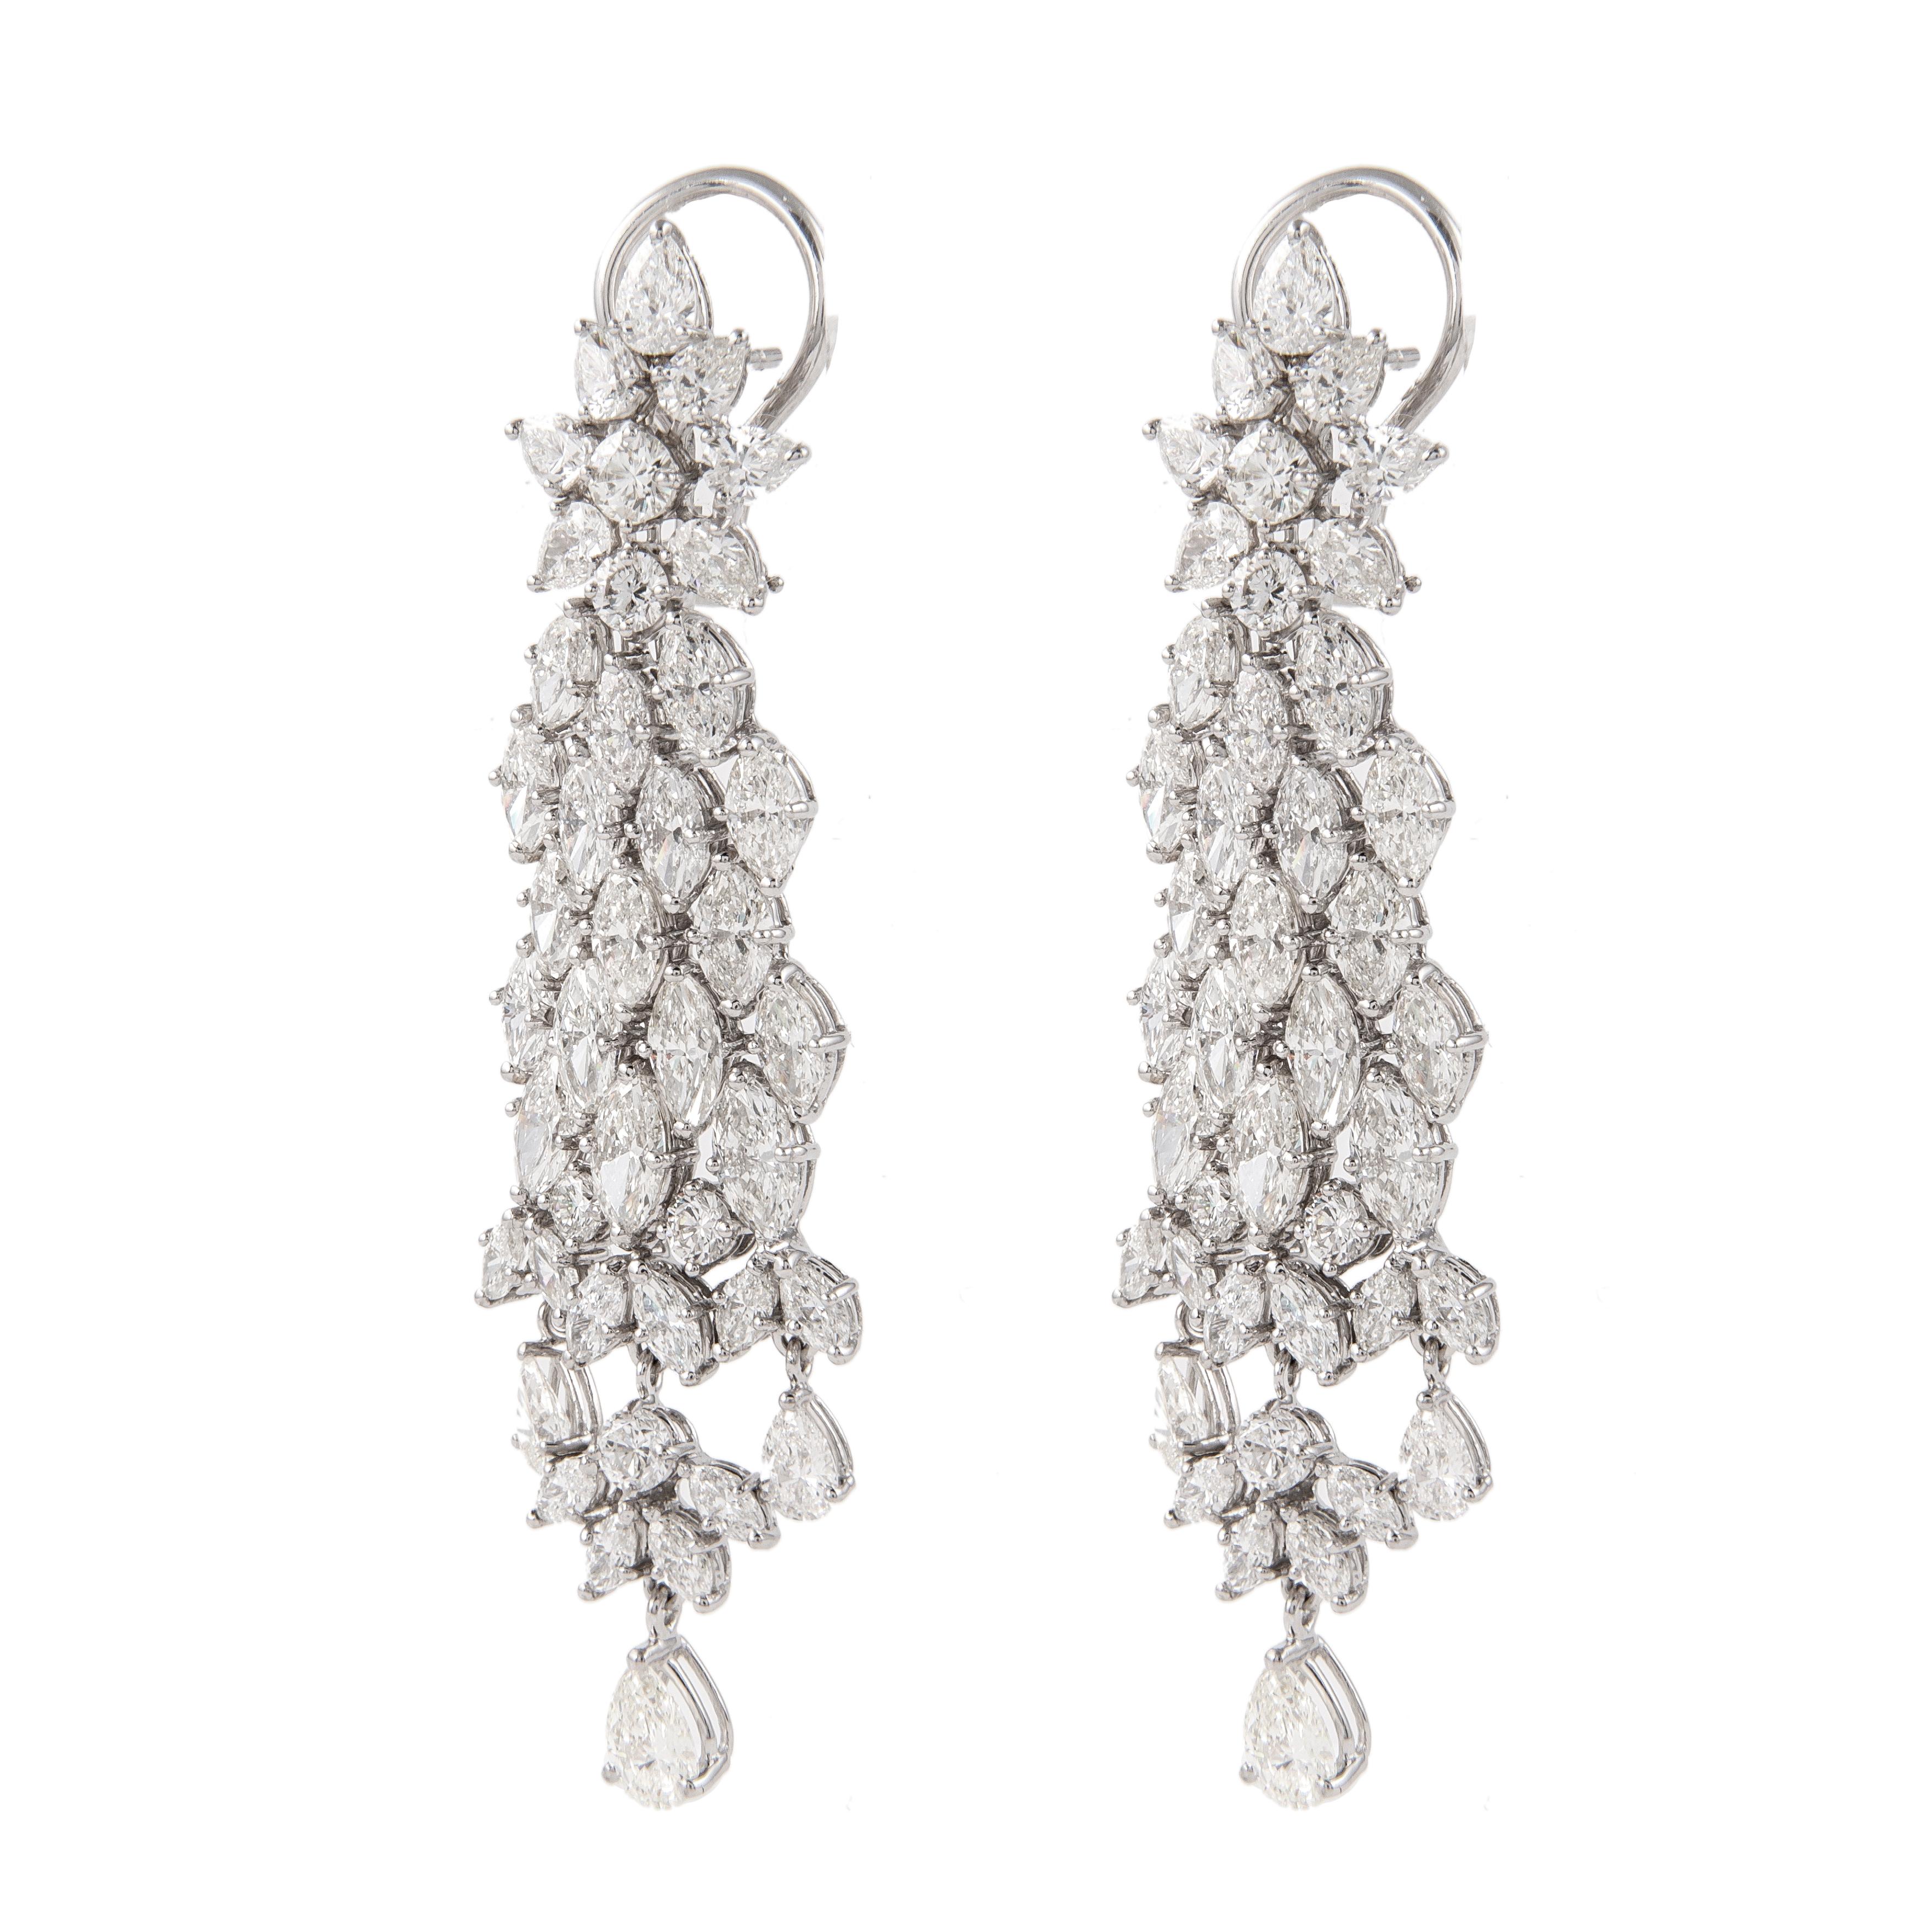 Contemporary Vintage Apx 15.80ct Pear, Round, & Marquise Diamond Chandelier Earrings For Sale